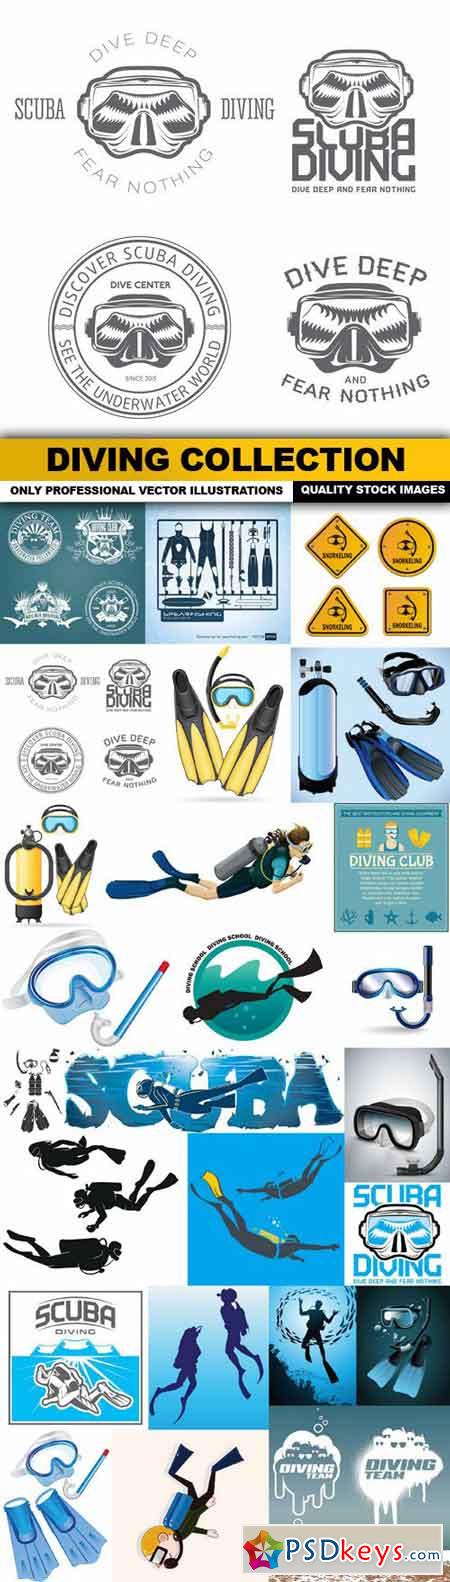 Diving Collection - 25 Vector